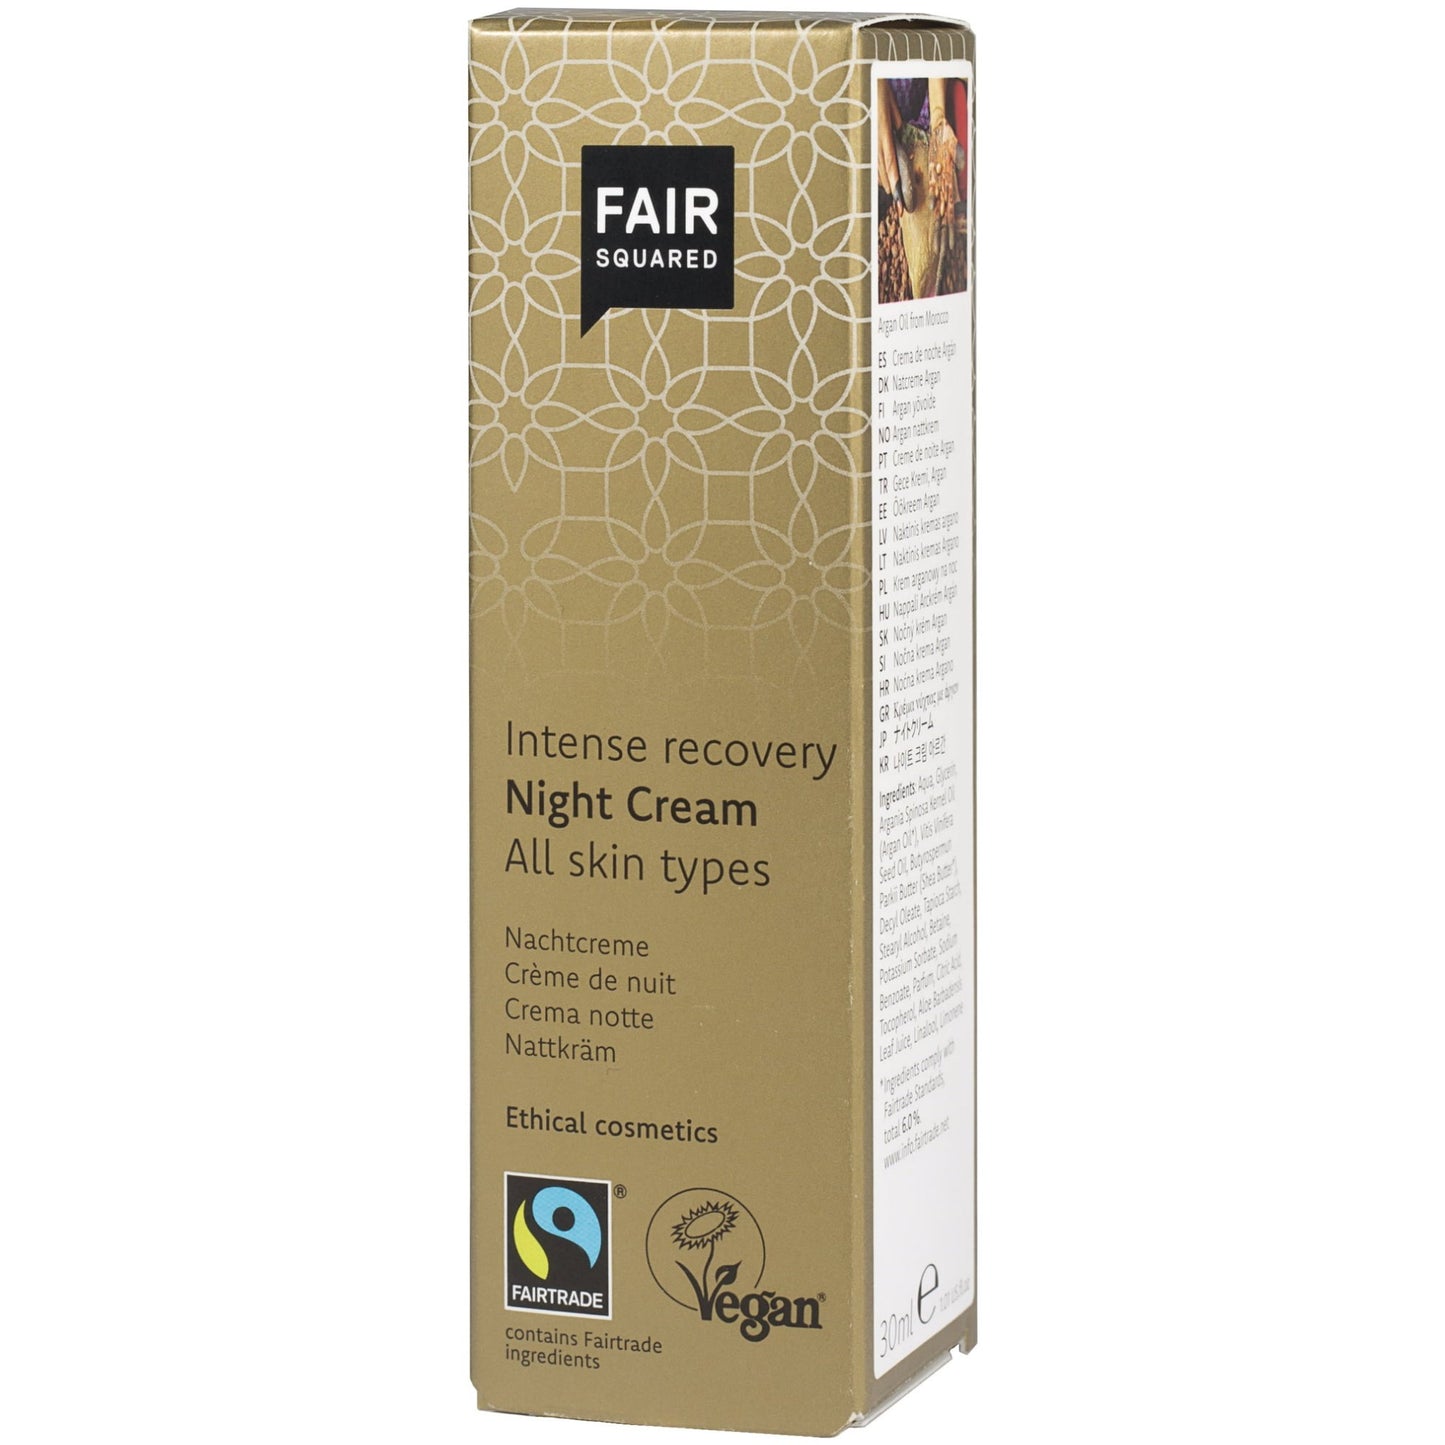 FAIR SQUARED Intense Recovery Night Cream | Fairtrade Vegan Natural Halal | Box | BeoVERDE.ie